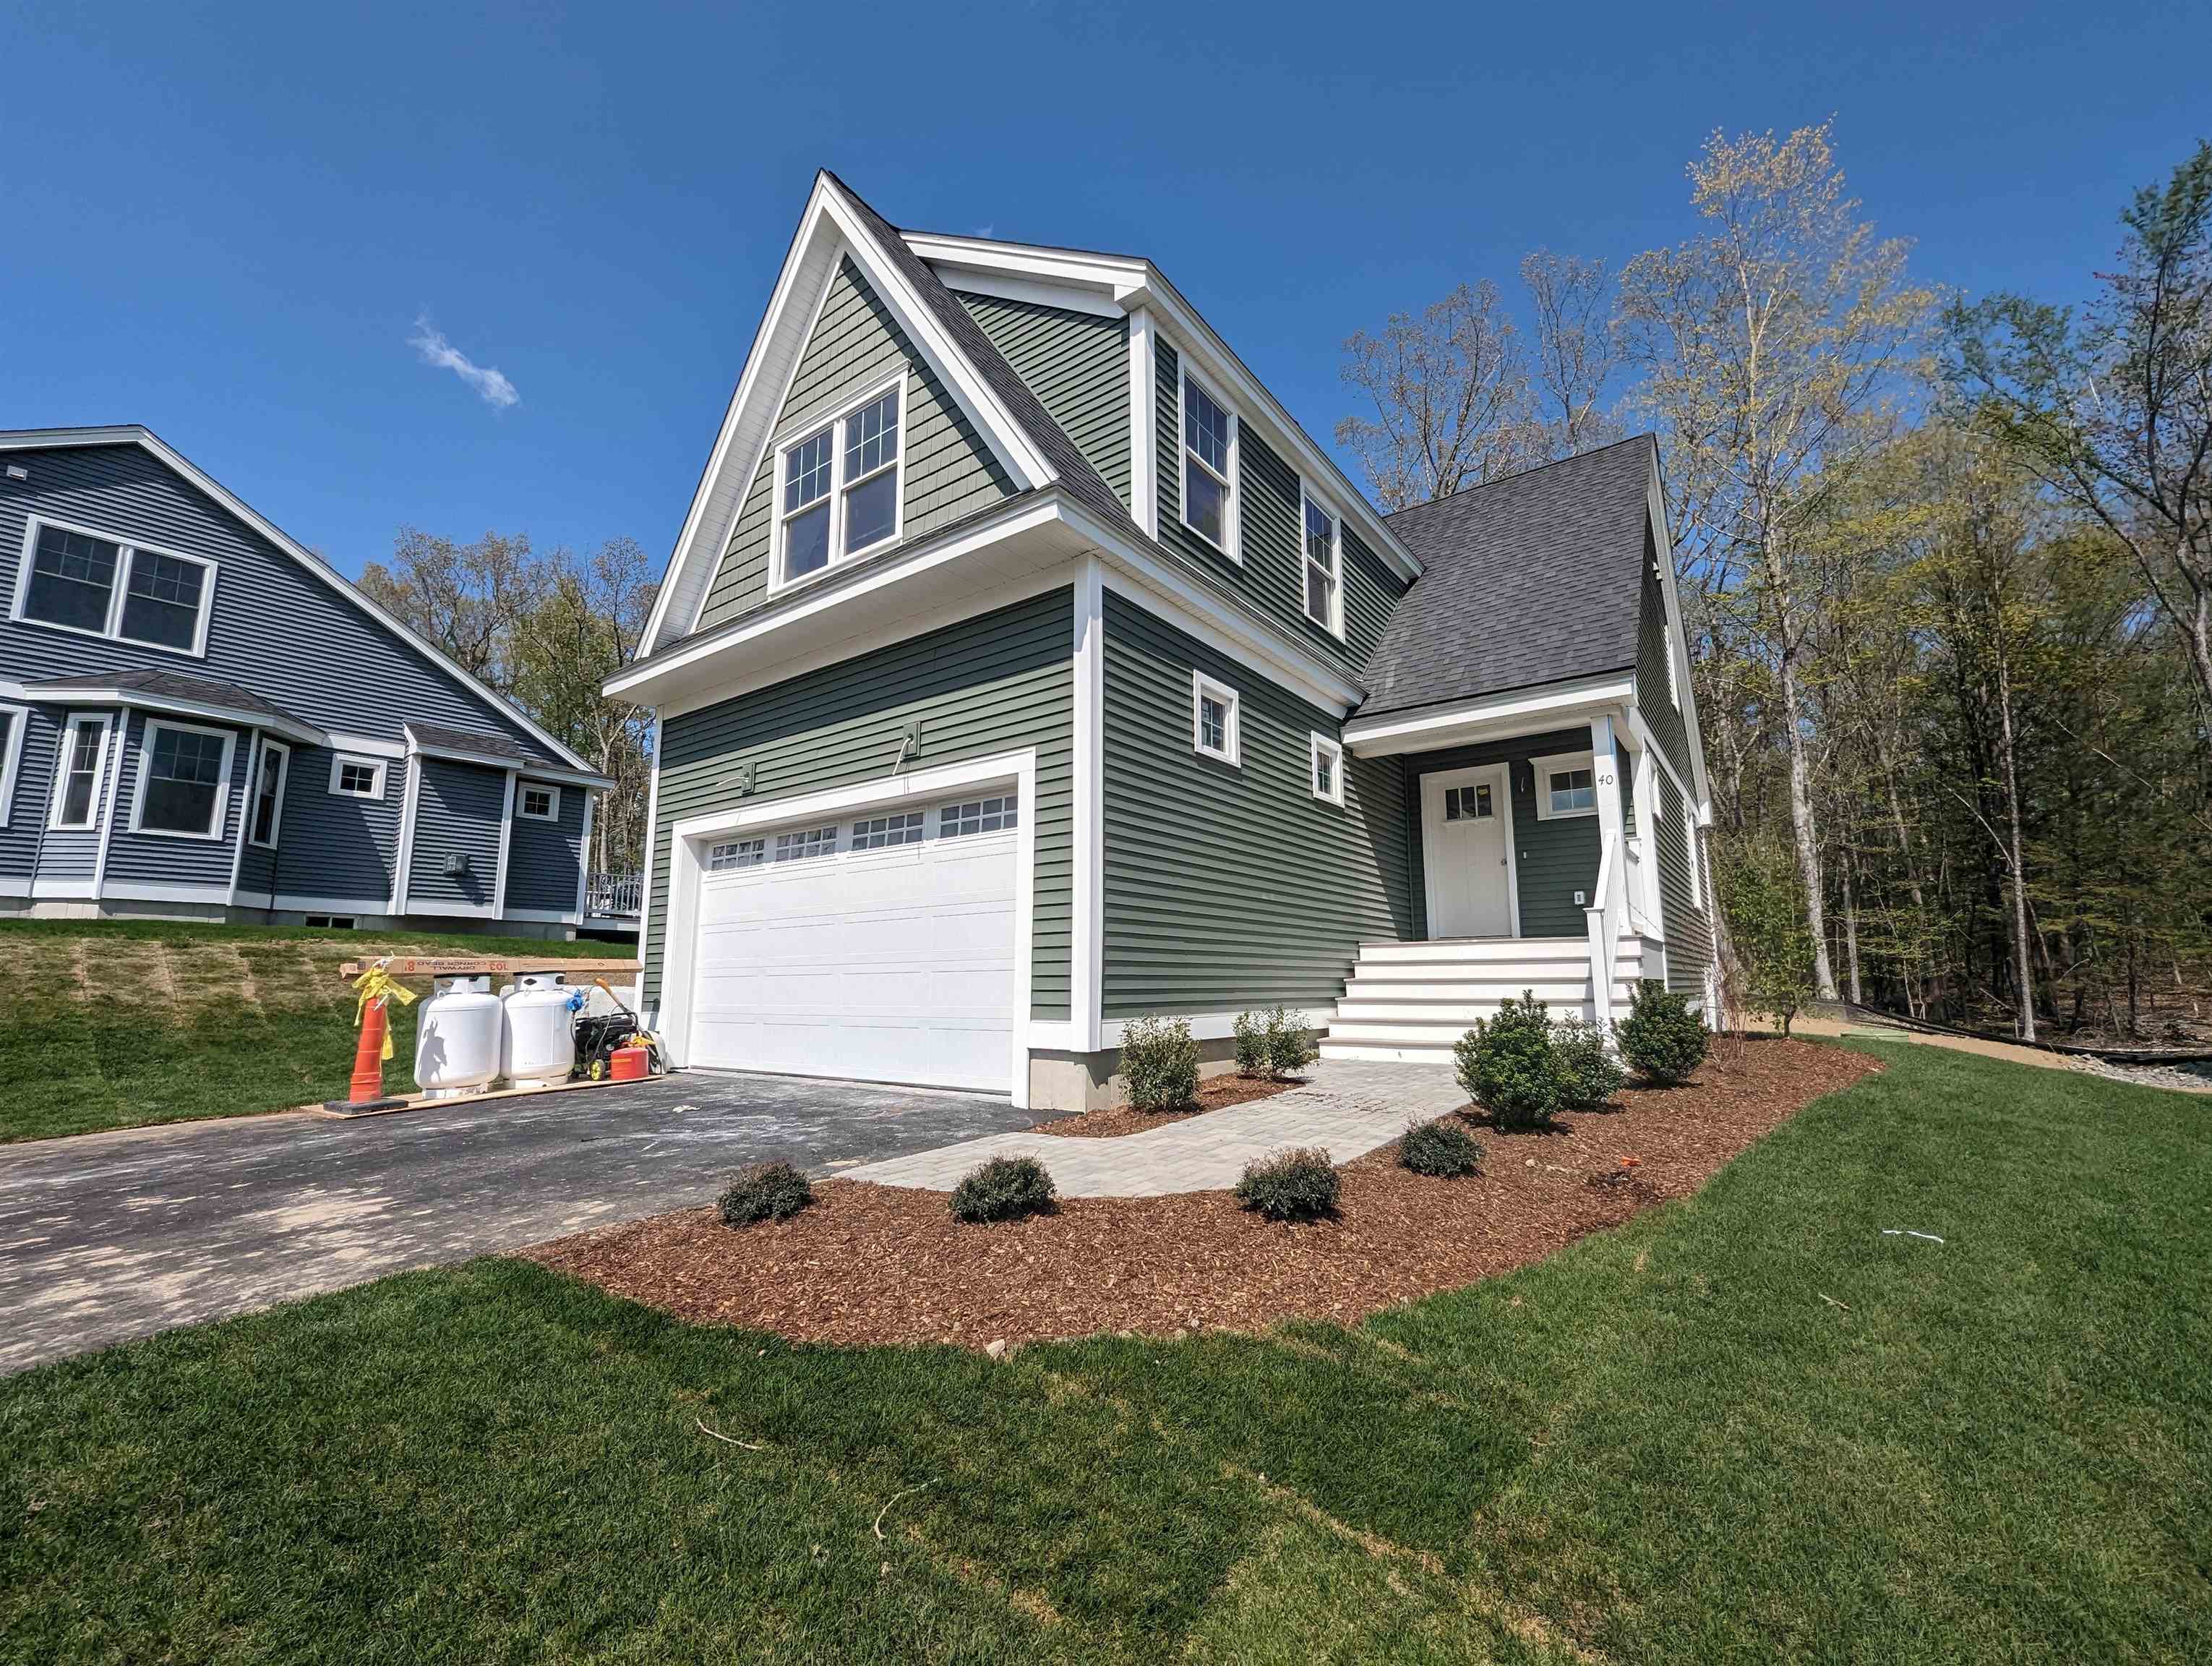 Photo of 40 Tanner Circle Newmarket NH 03857